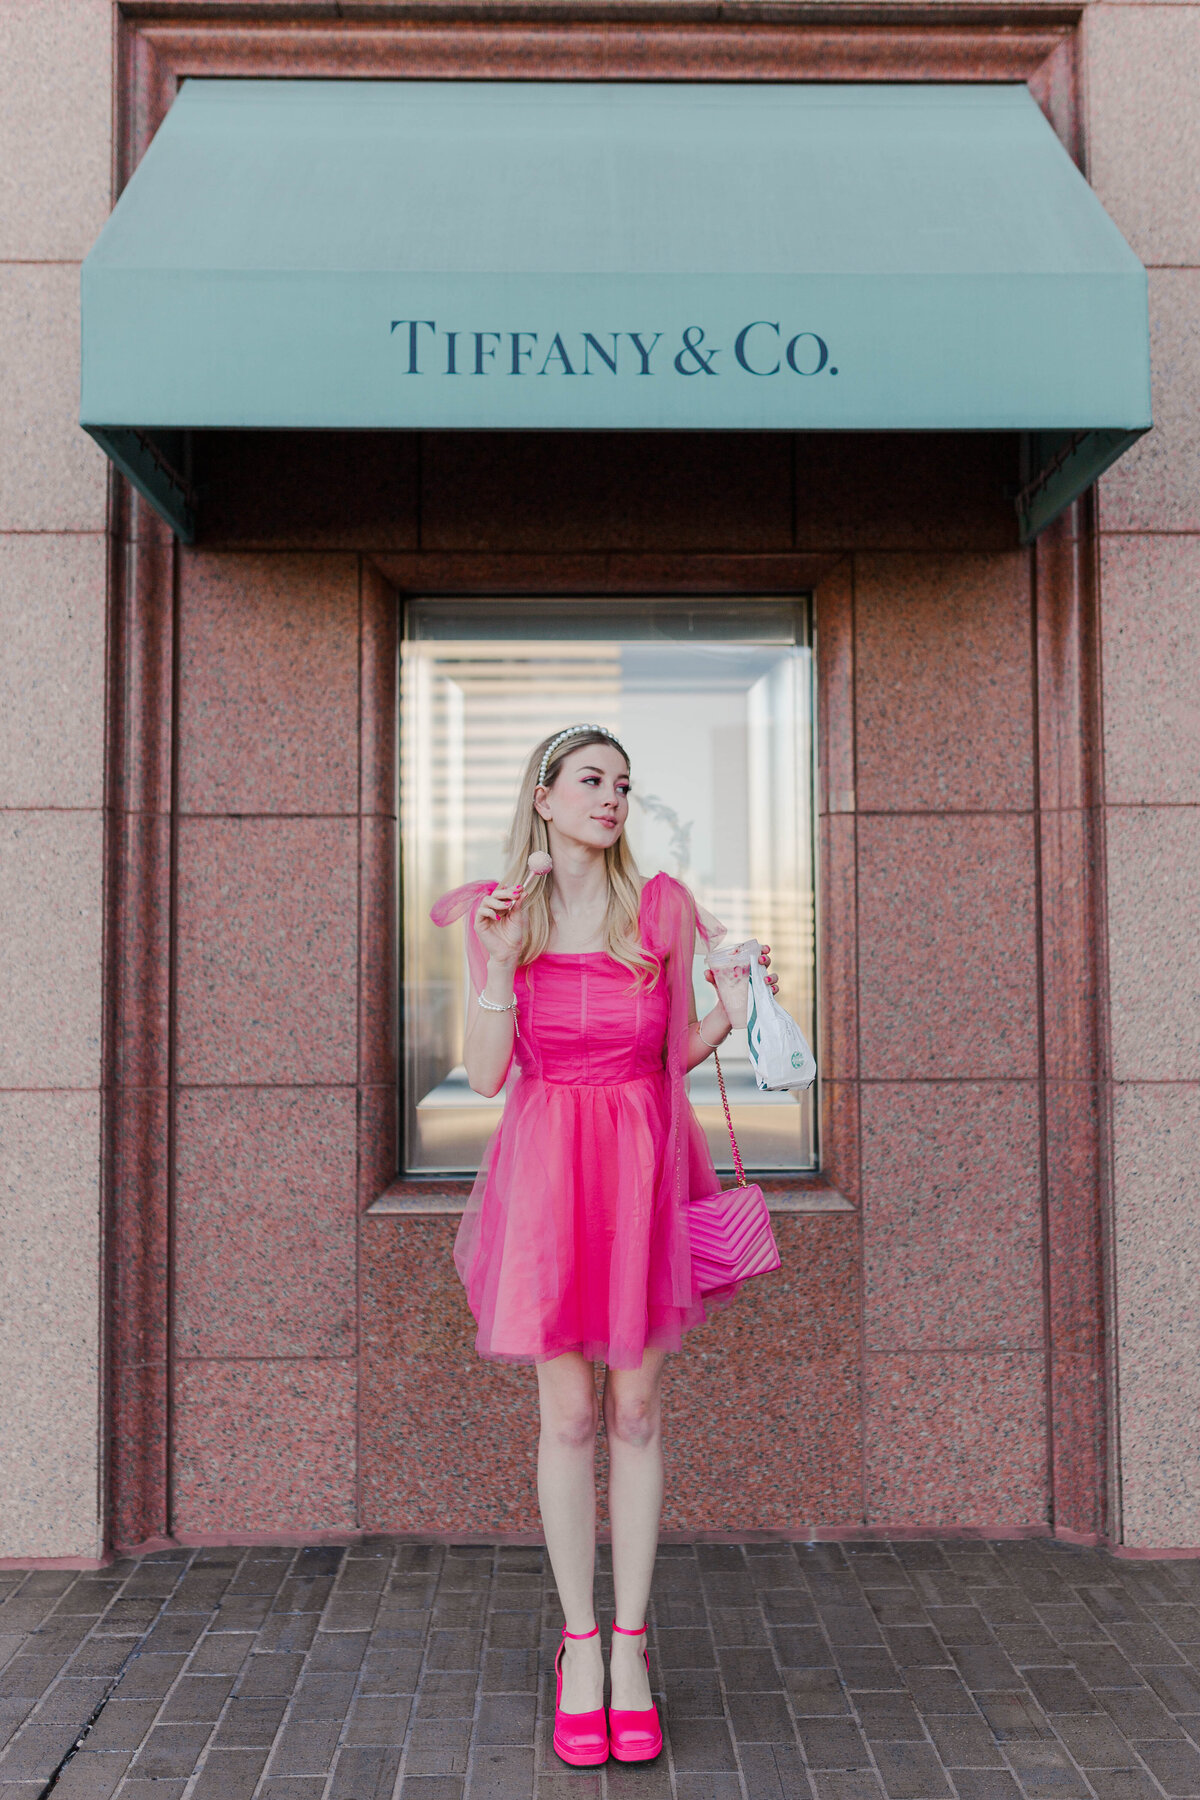 Breakfast at tiffany's barbie model poses in front of tiffany's at the houston galleria